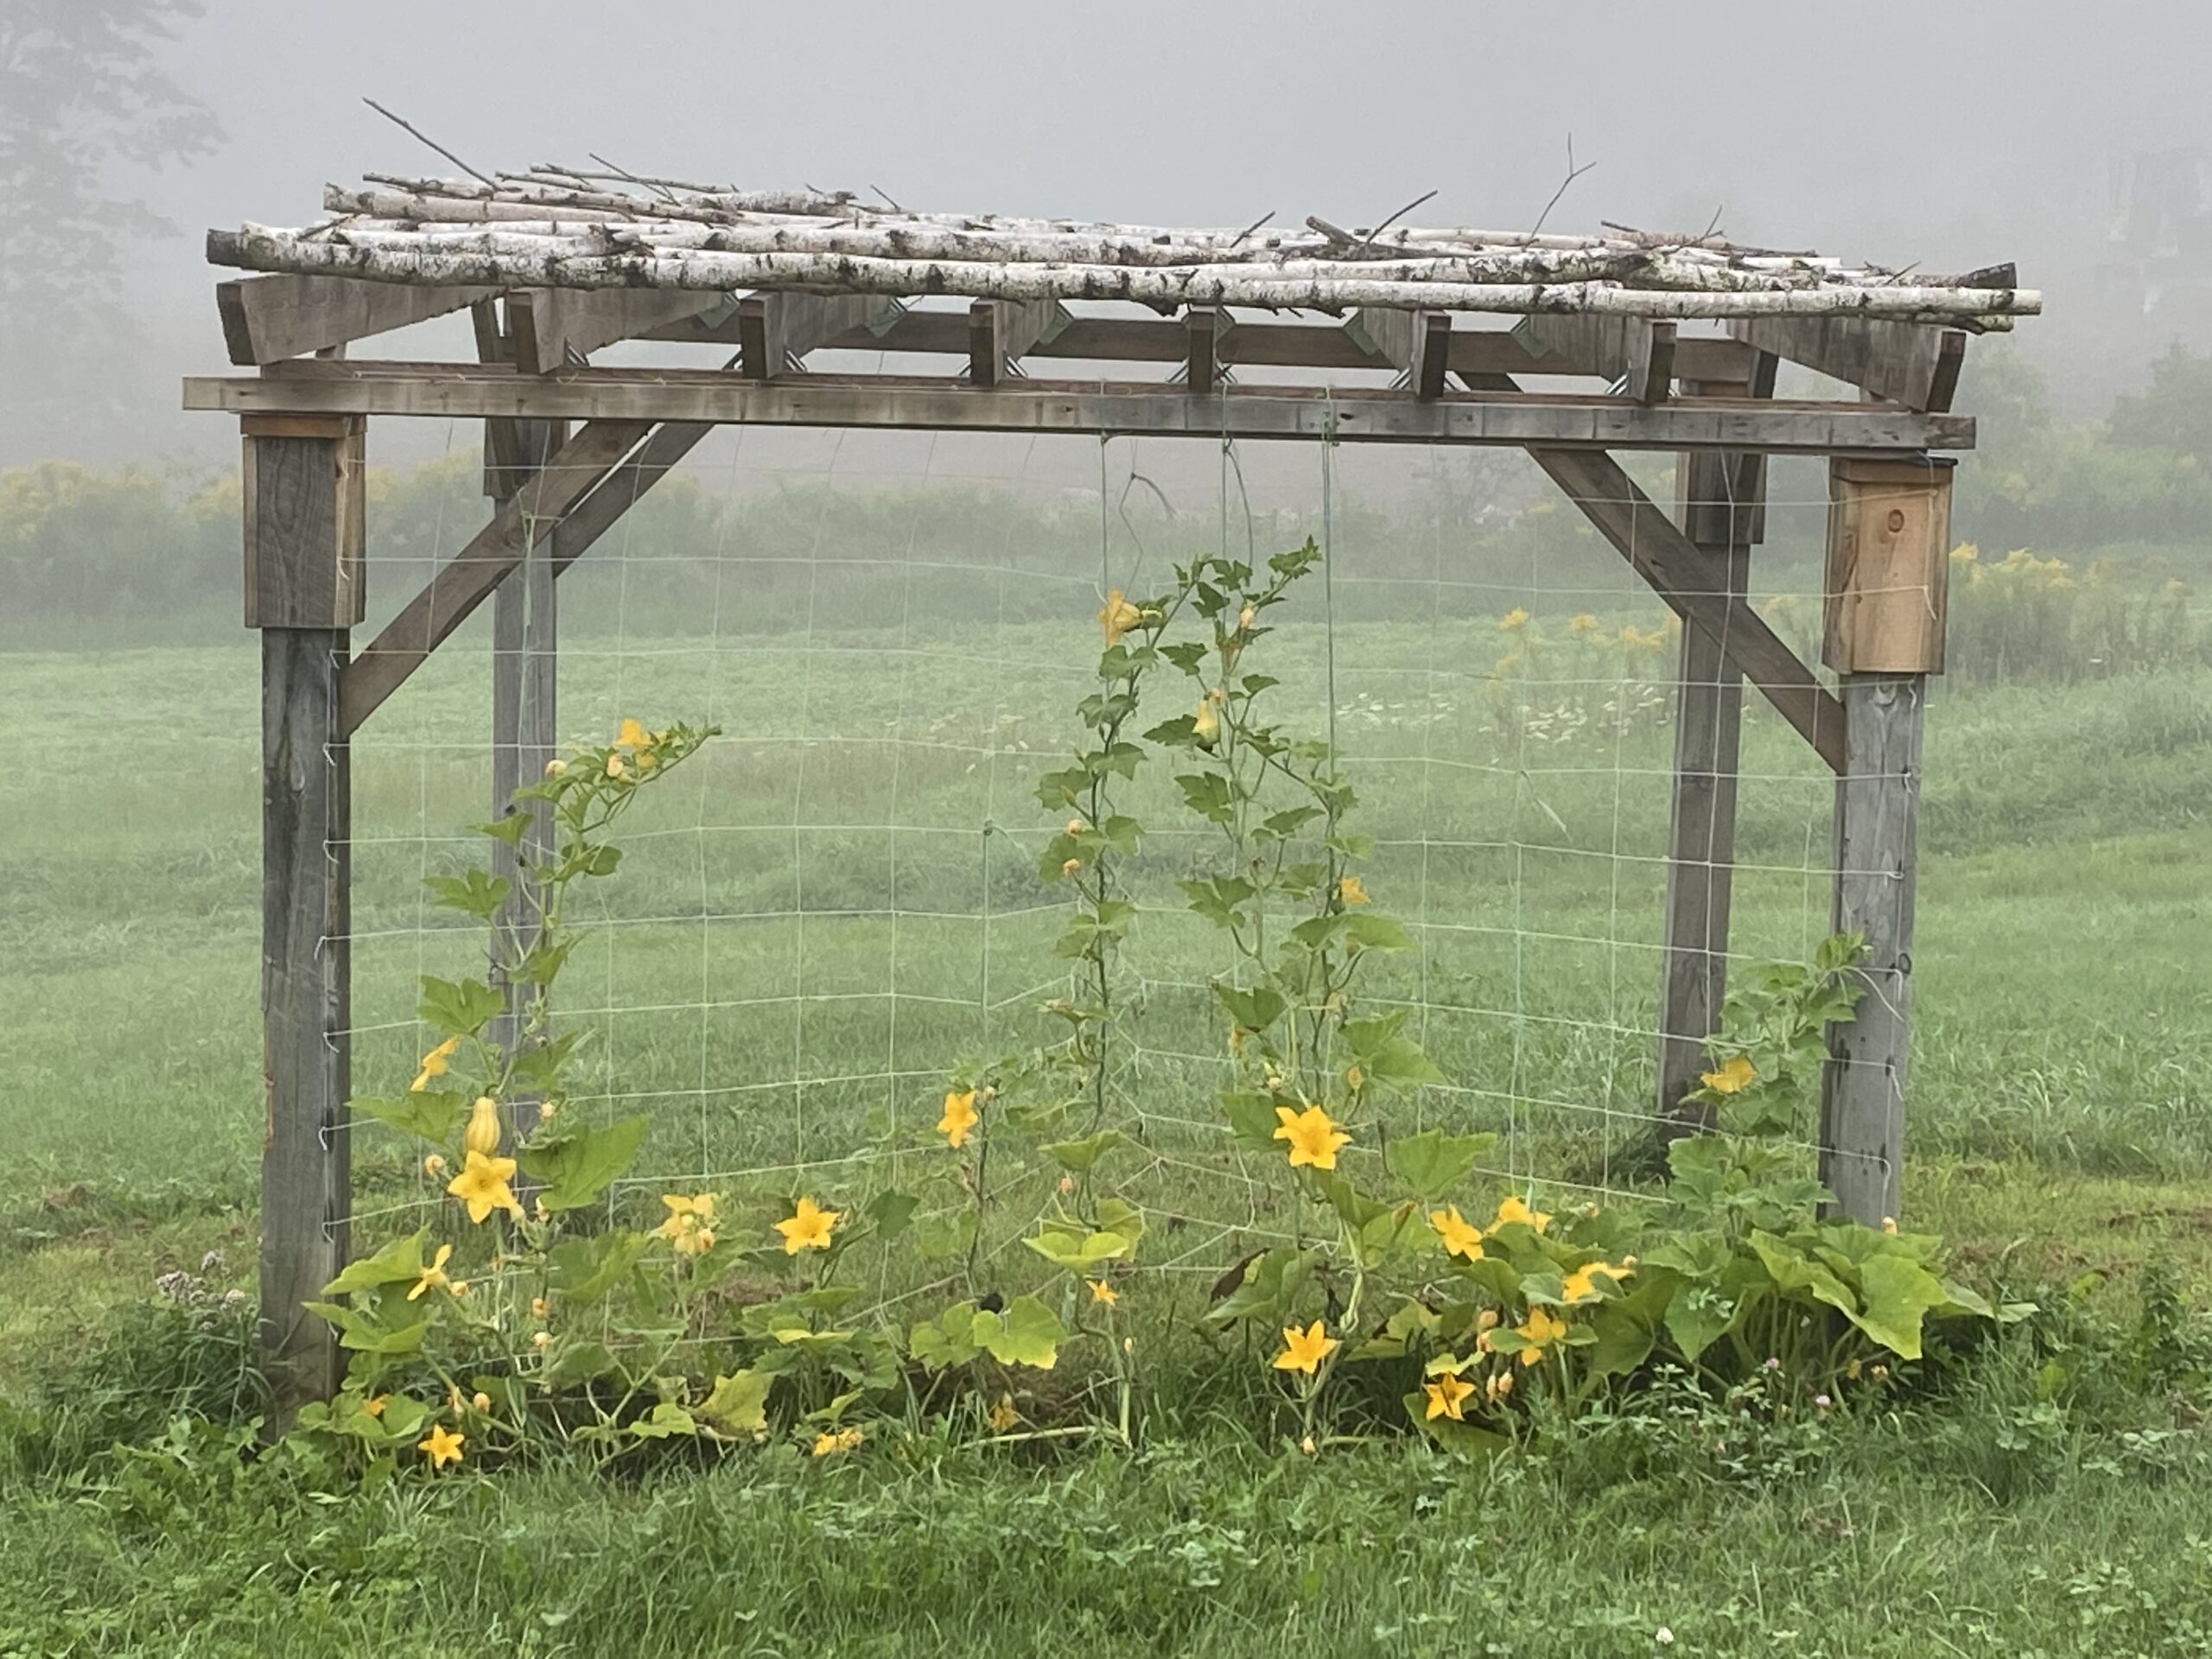 Pumpkin vines with orange flowers growing up trellis in a foggy field at the farm in midcoast Maine